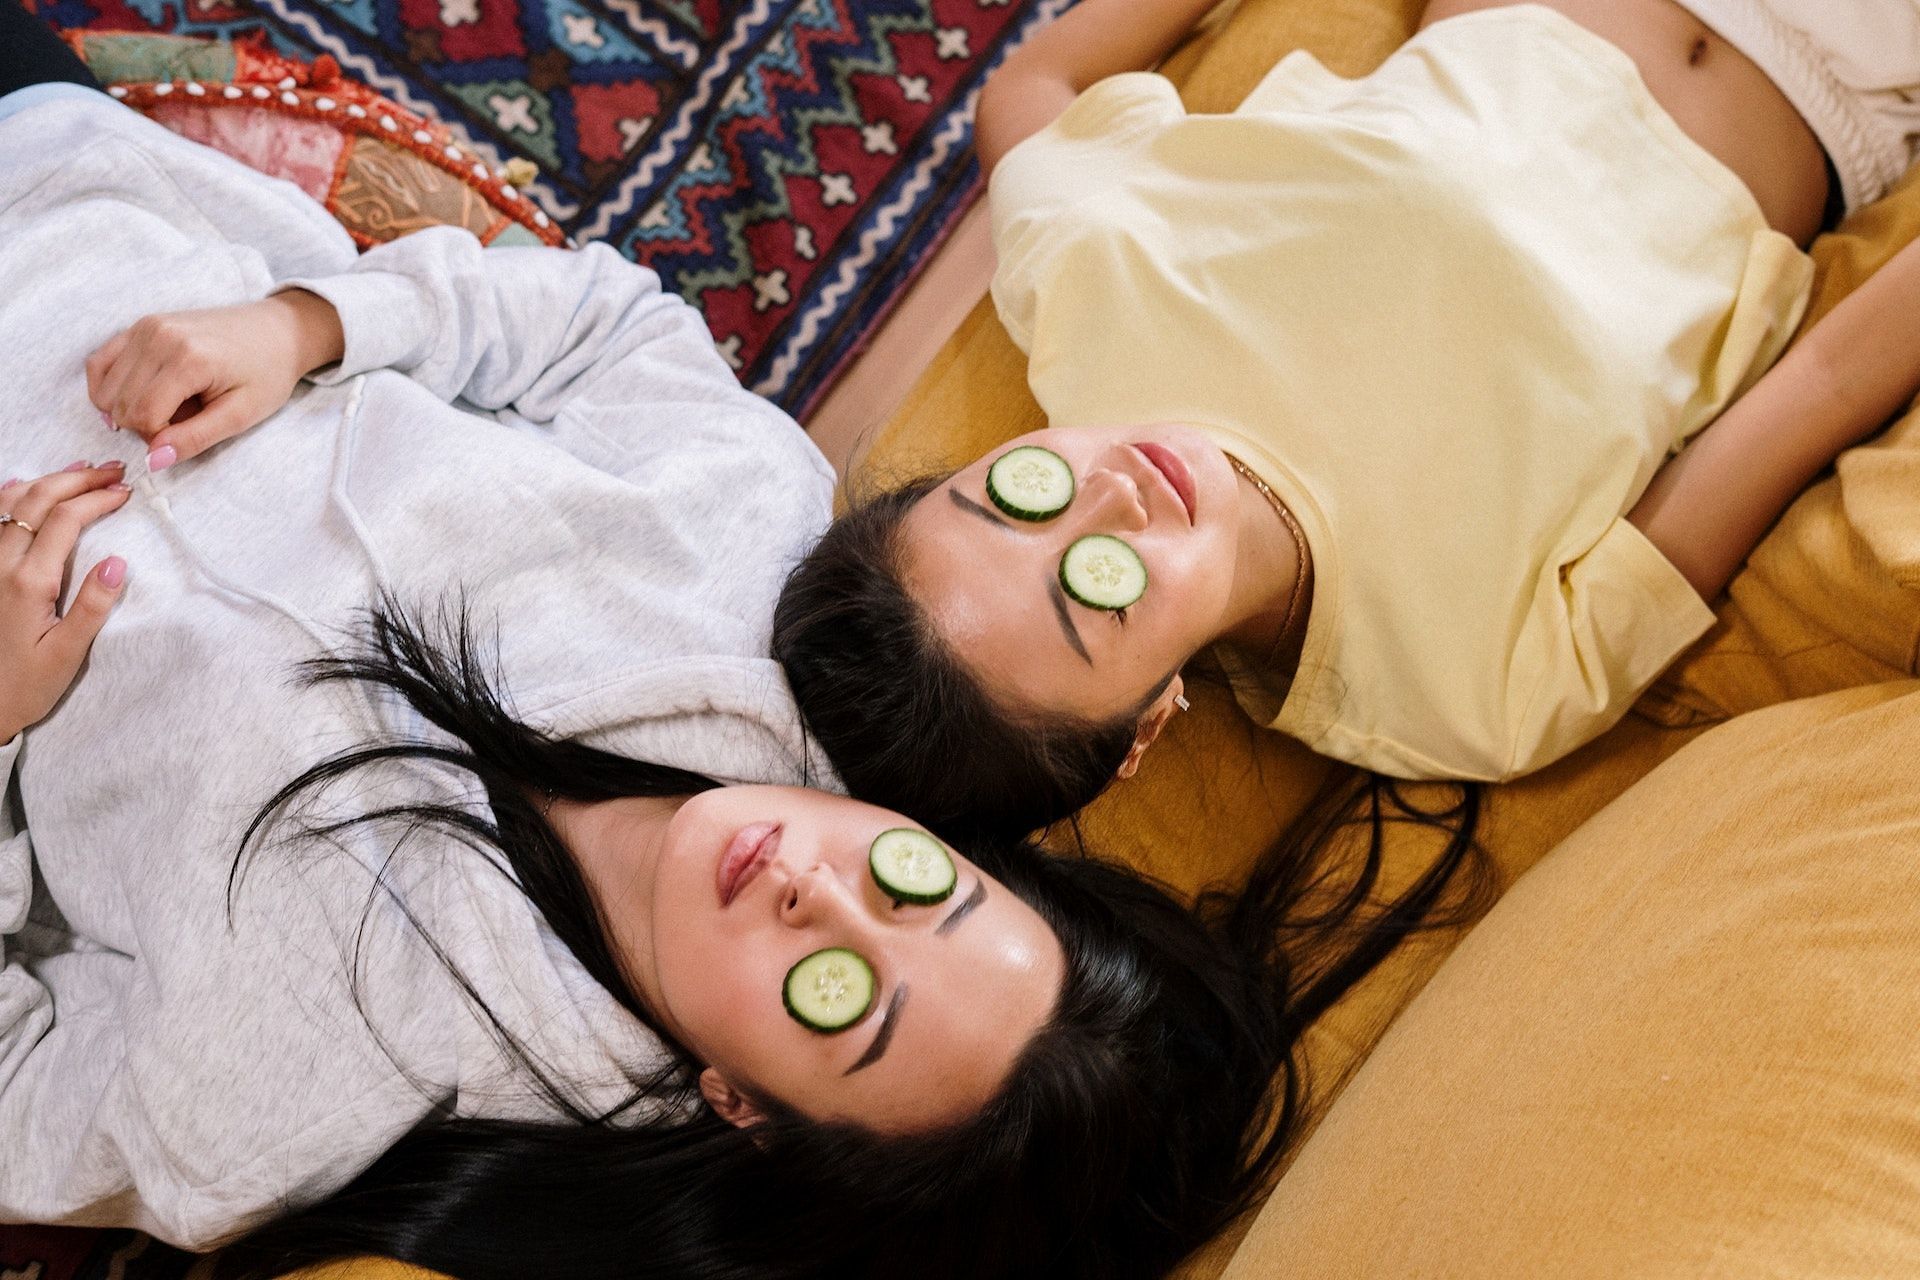 Cucumbers can reduce pufffiness under the eyes. (Photo via Pexels/cottonbro studio)